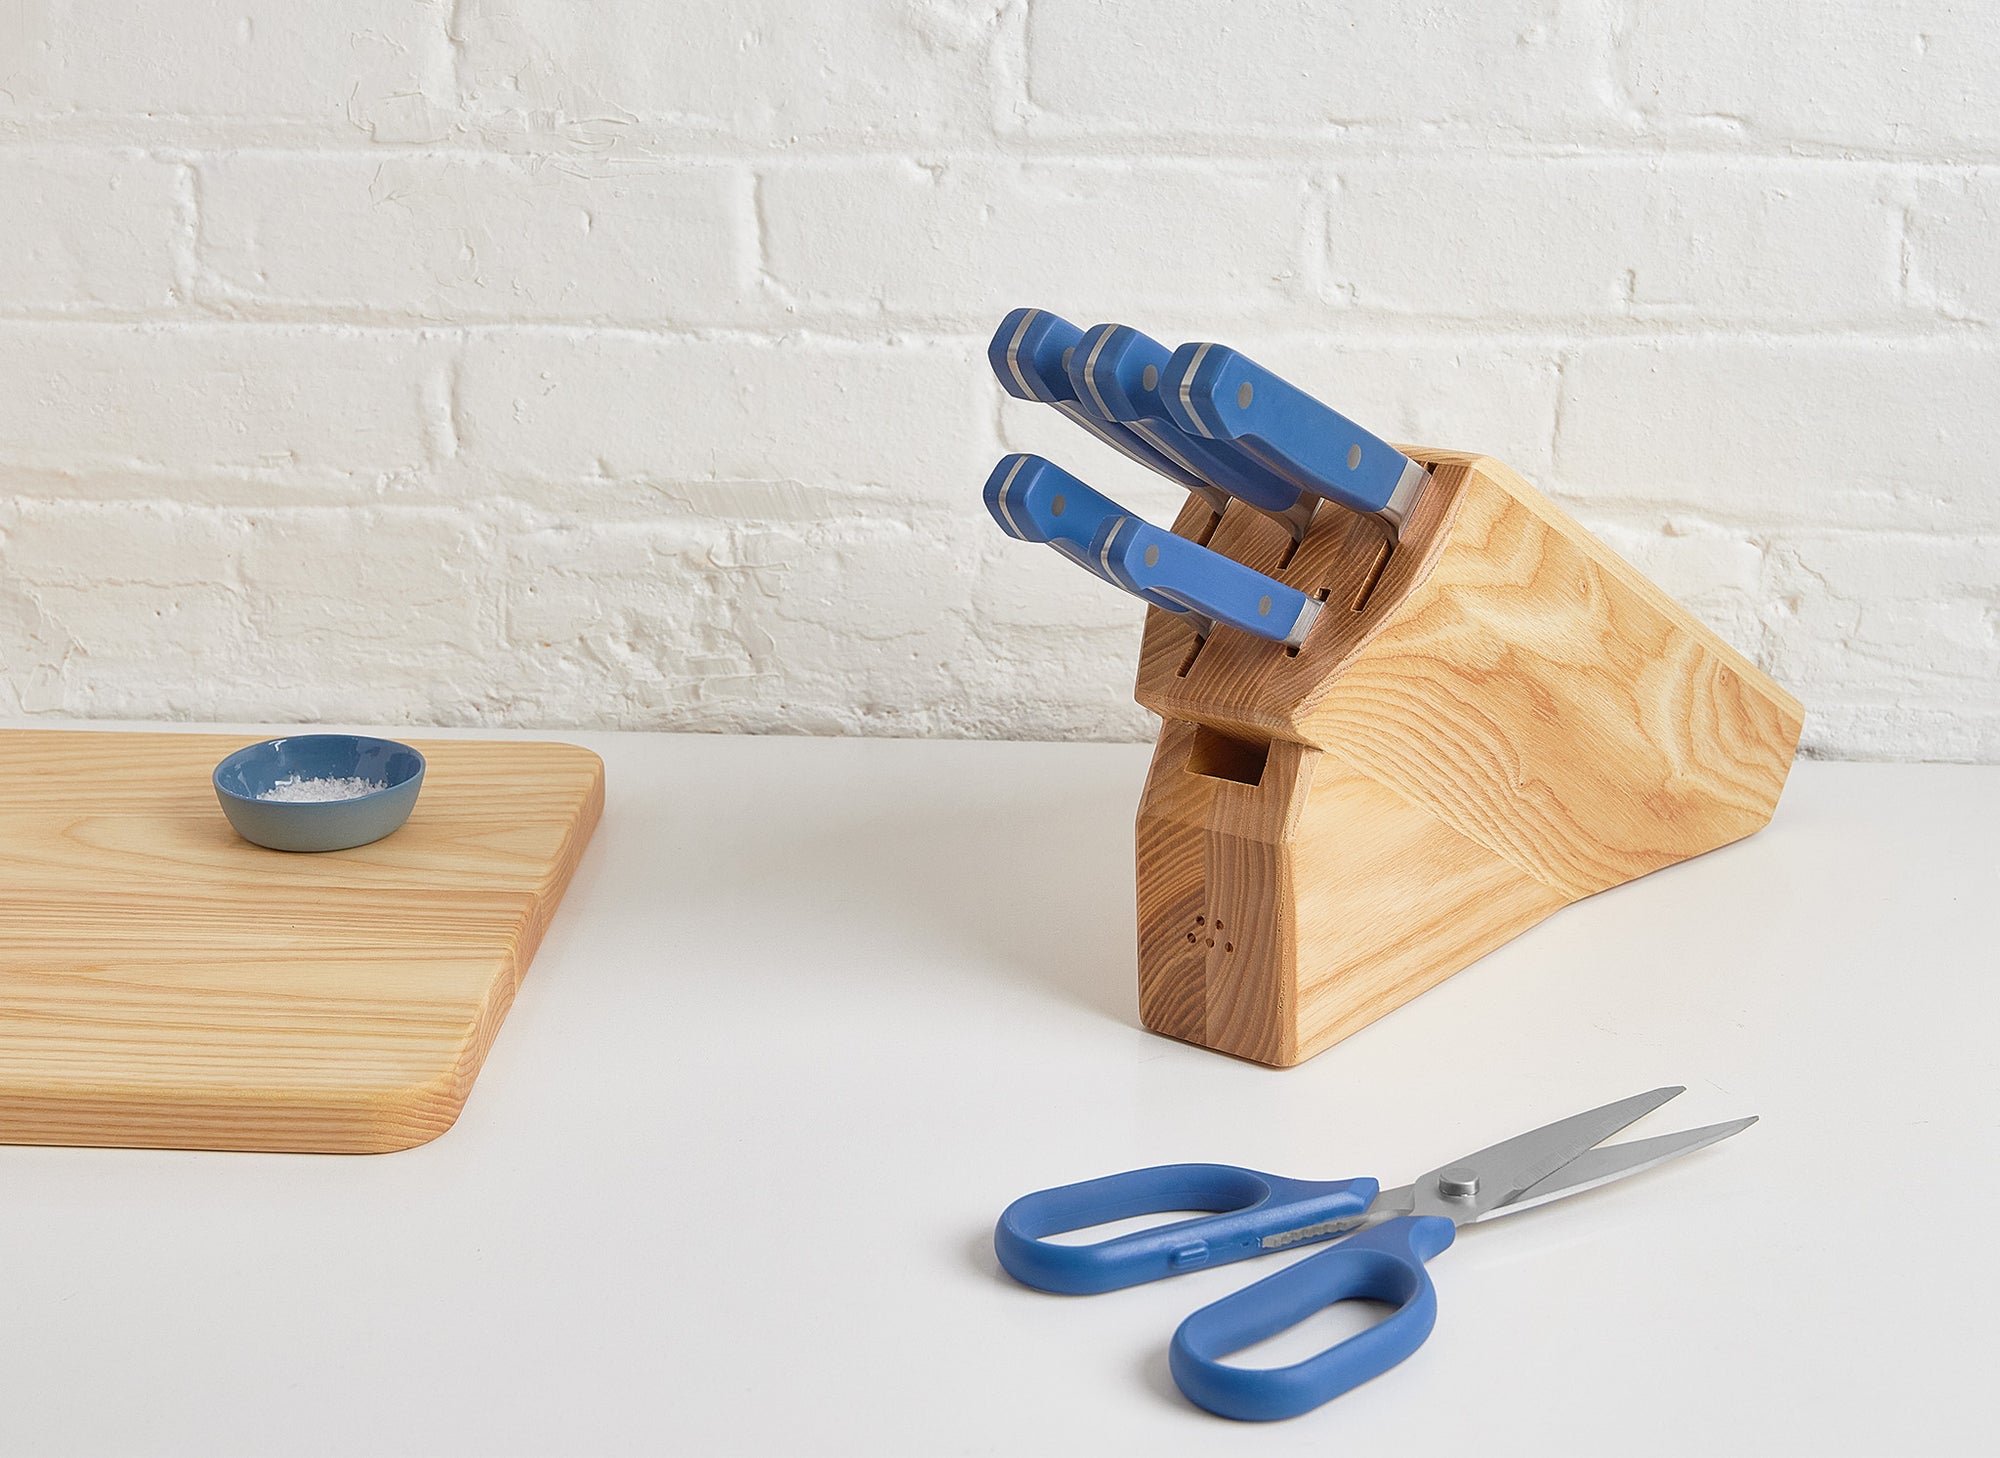 An Ash Misen Knife Block containing a 5-piece Misen Knife Set, with Misen Kitchen Shears nearby on a white countertop.